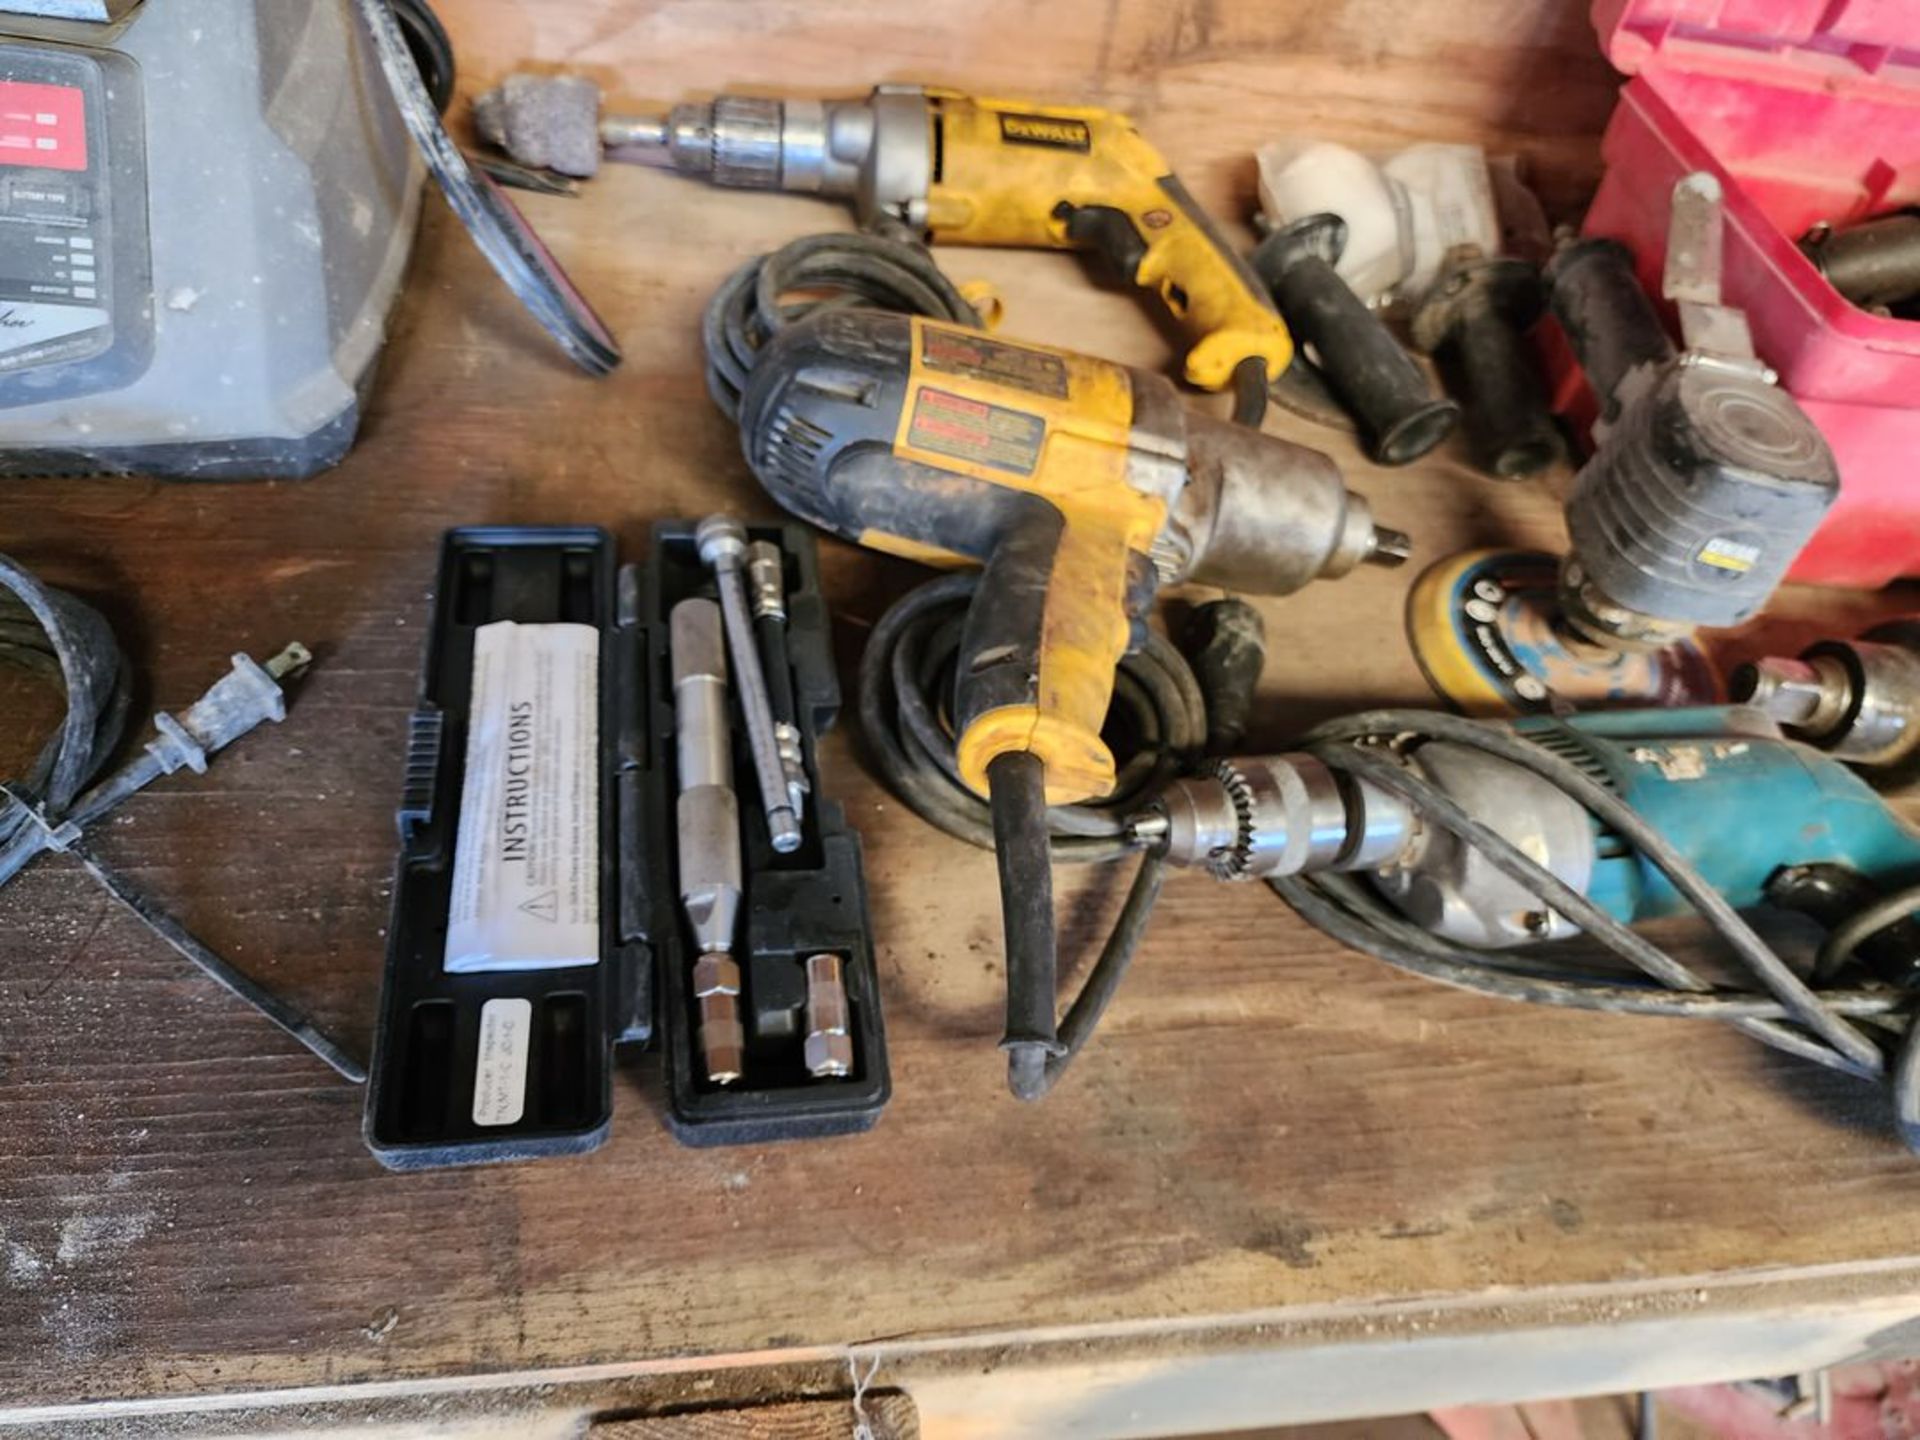 Contents Of Rack To Include But Not Limited To: (Welder Excluded) Assorted Power Tools; Drills; - Image 9 of 49